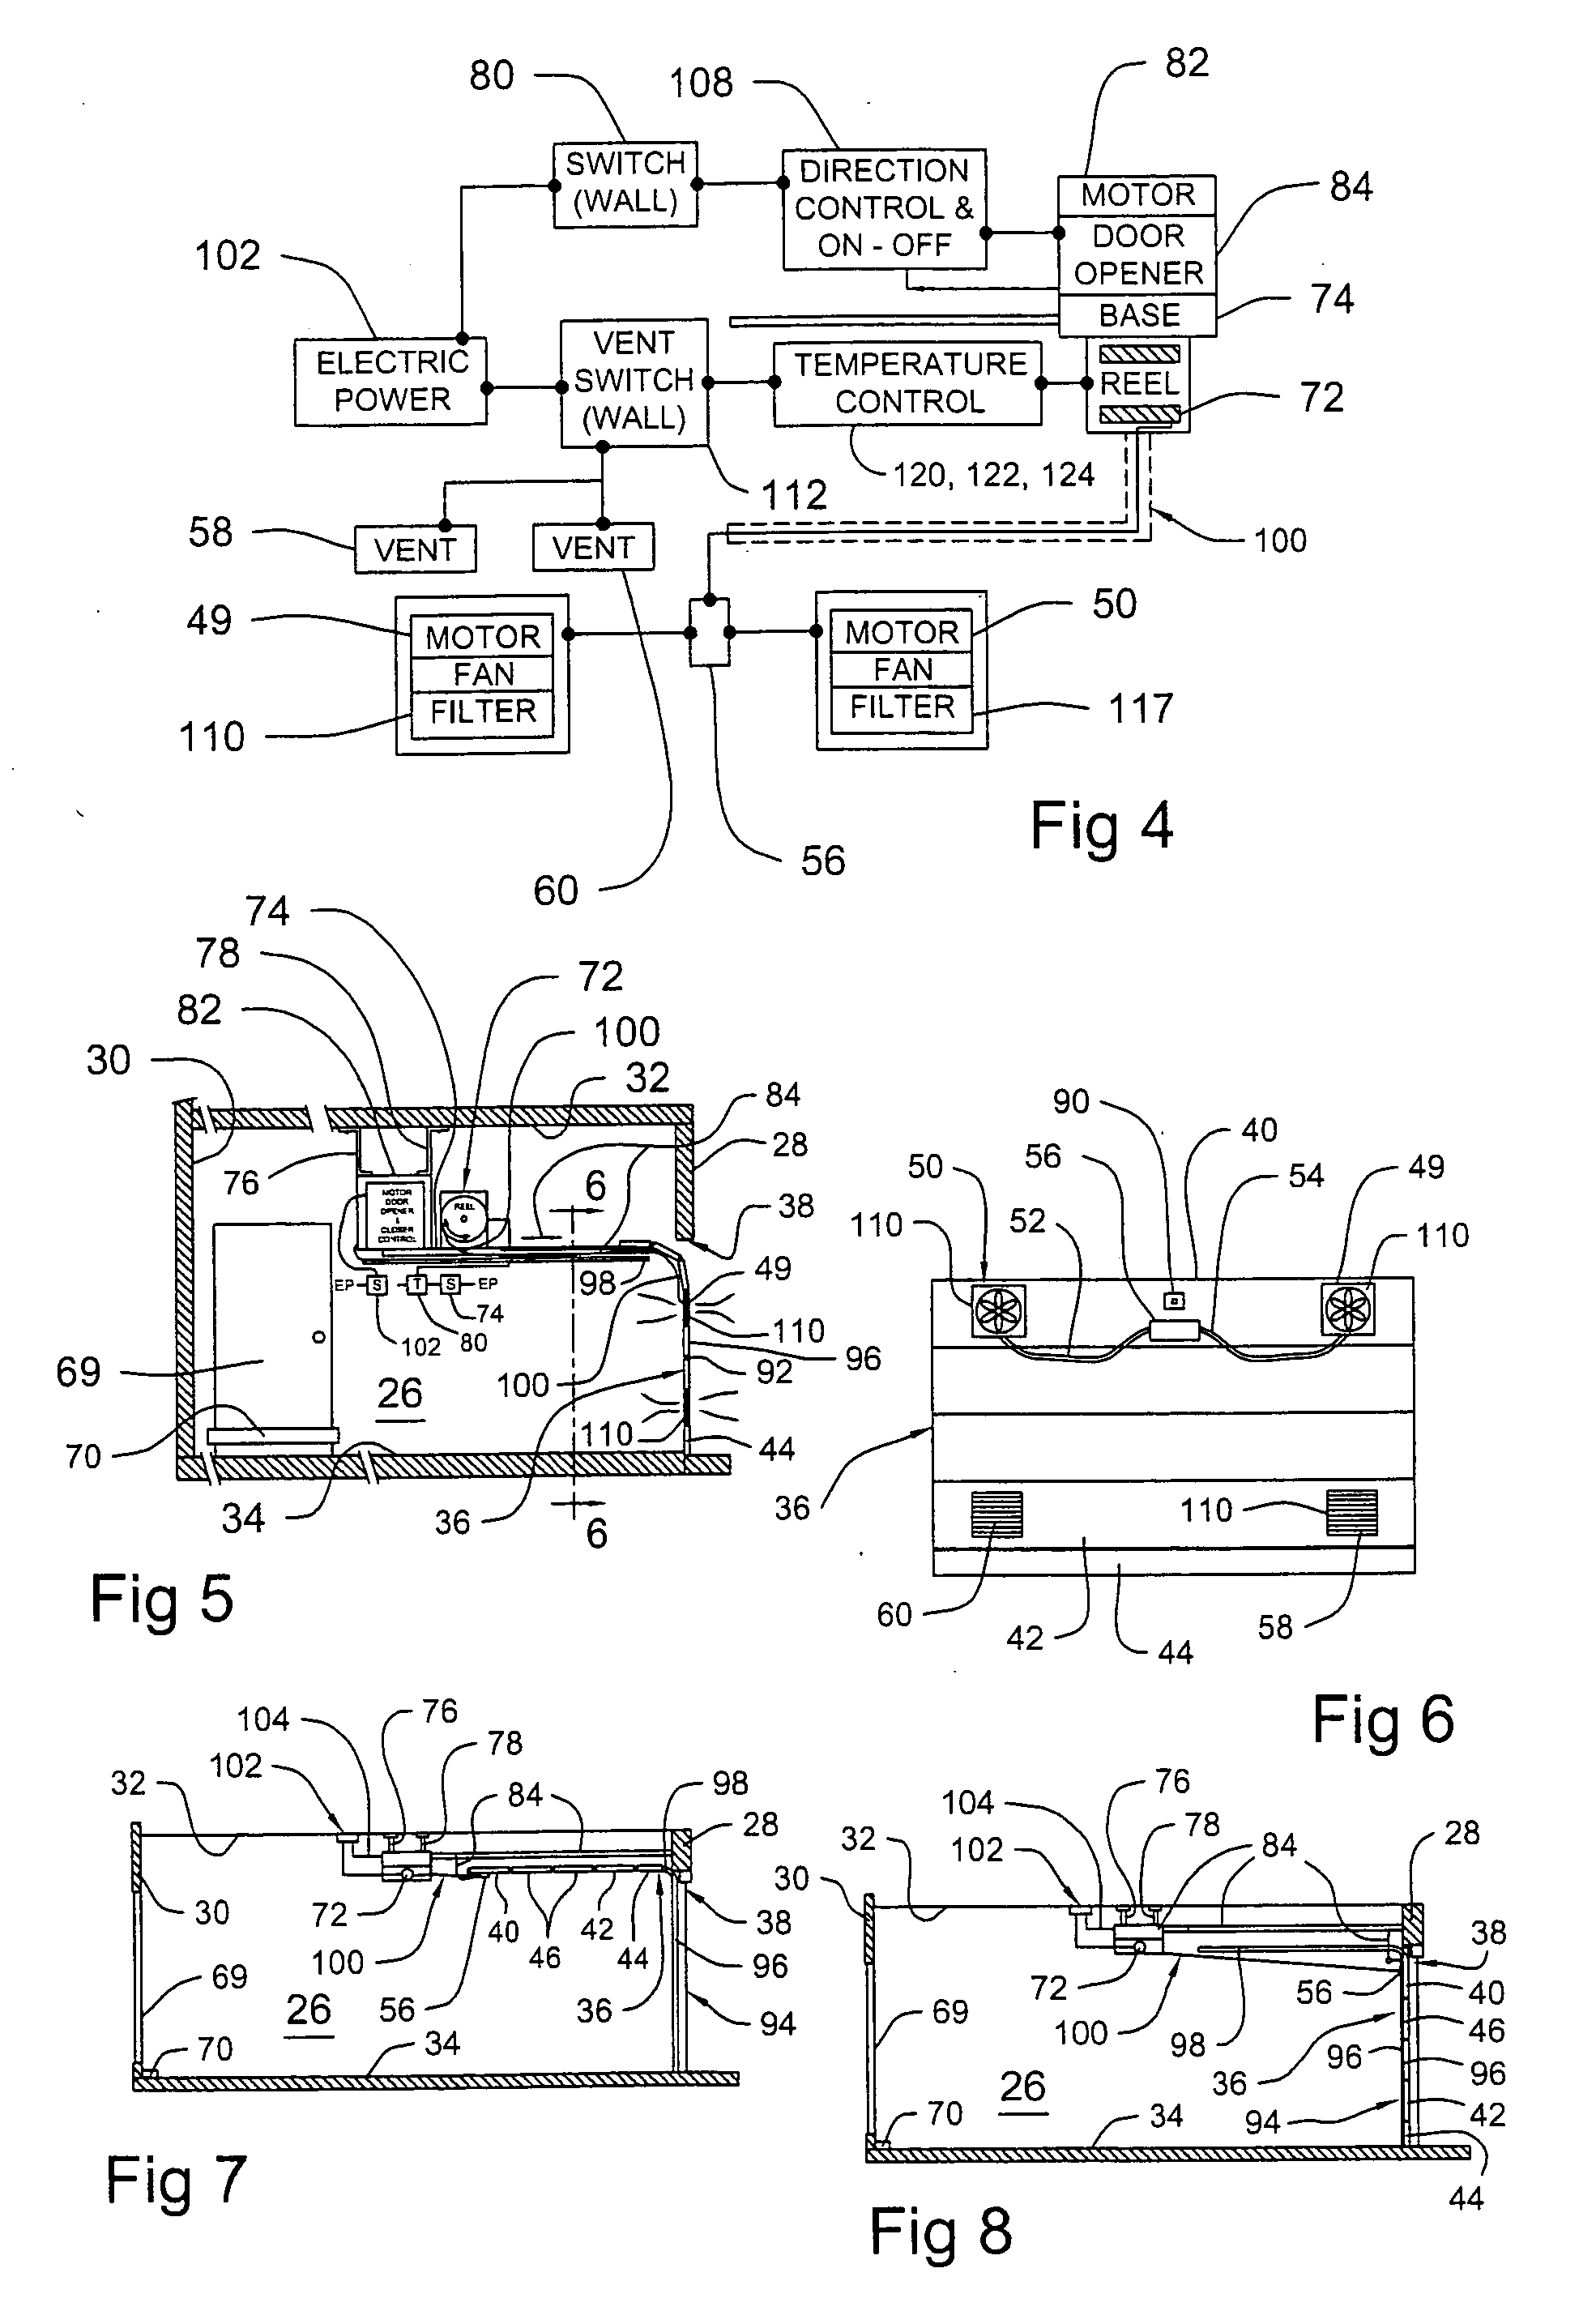 Ventilating system for garages and similar enclosed spaces